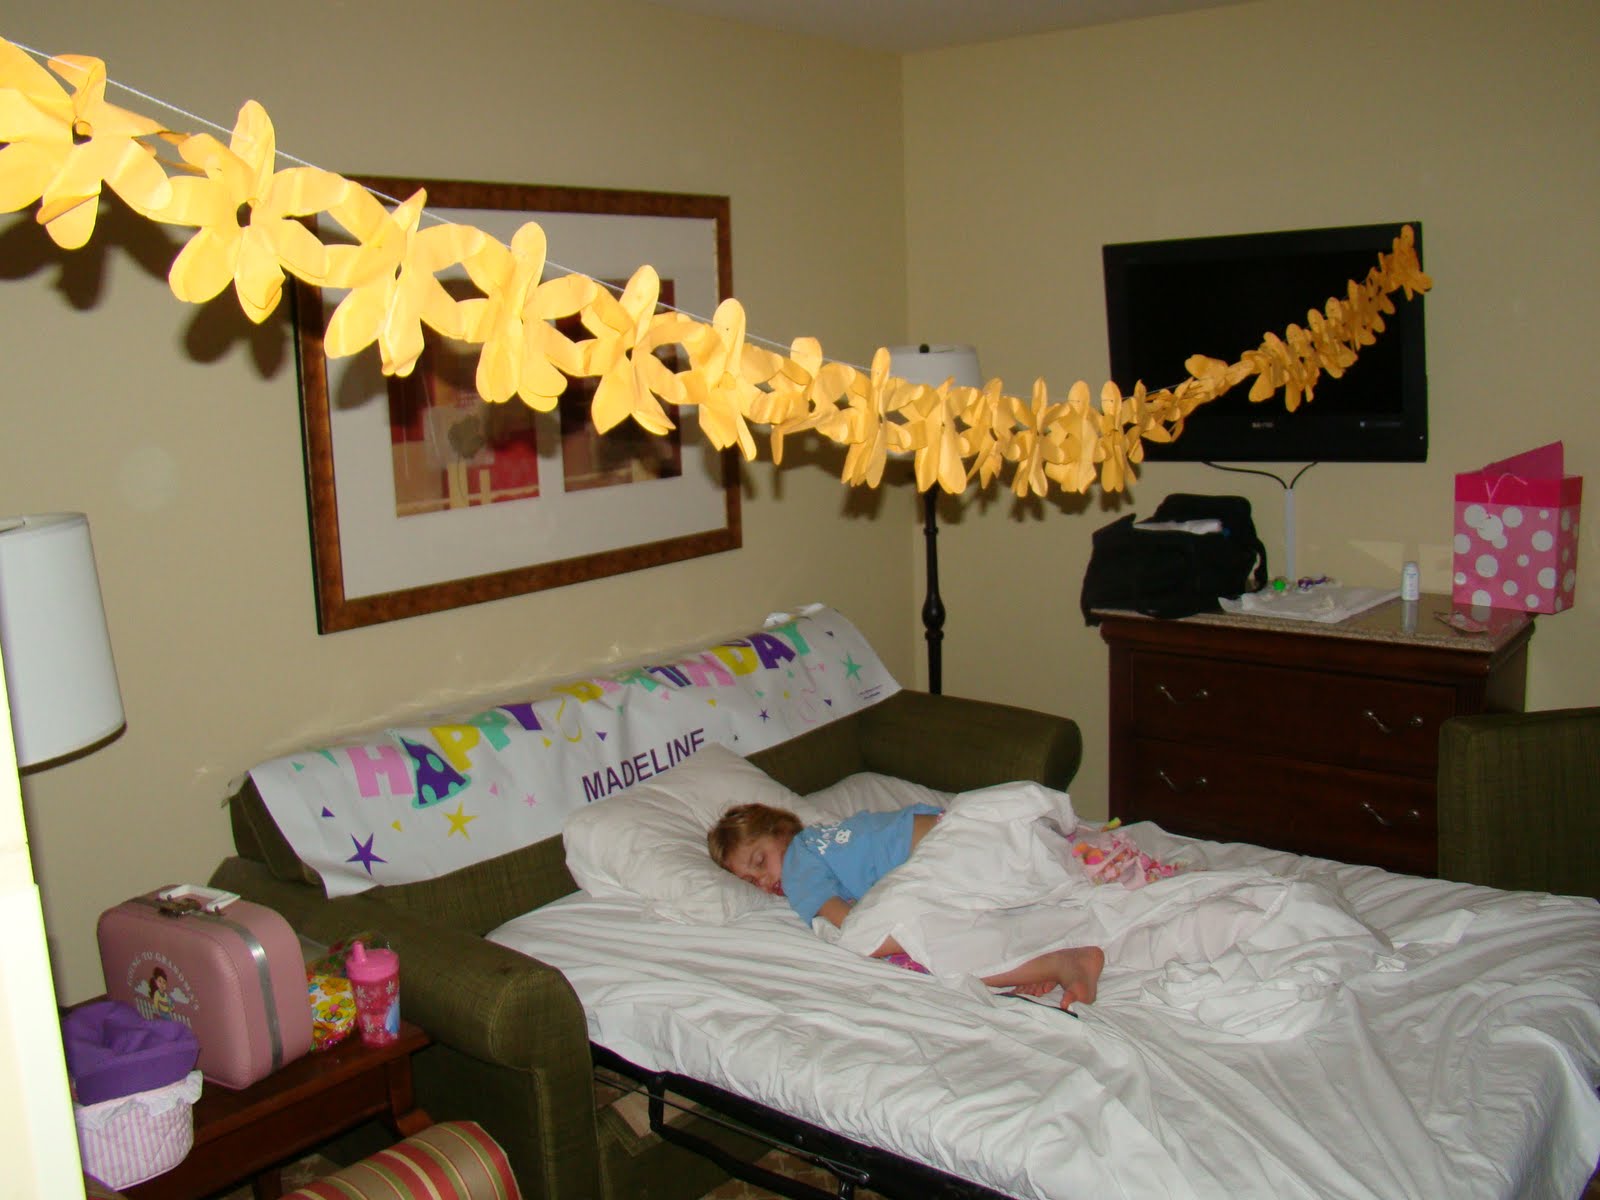  Hotel  Room  Birthday  Party  Decorations  